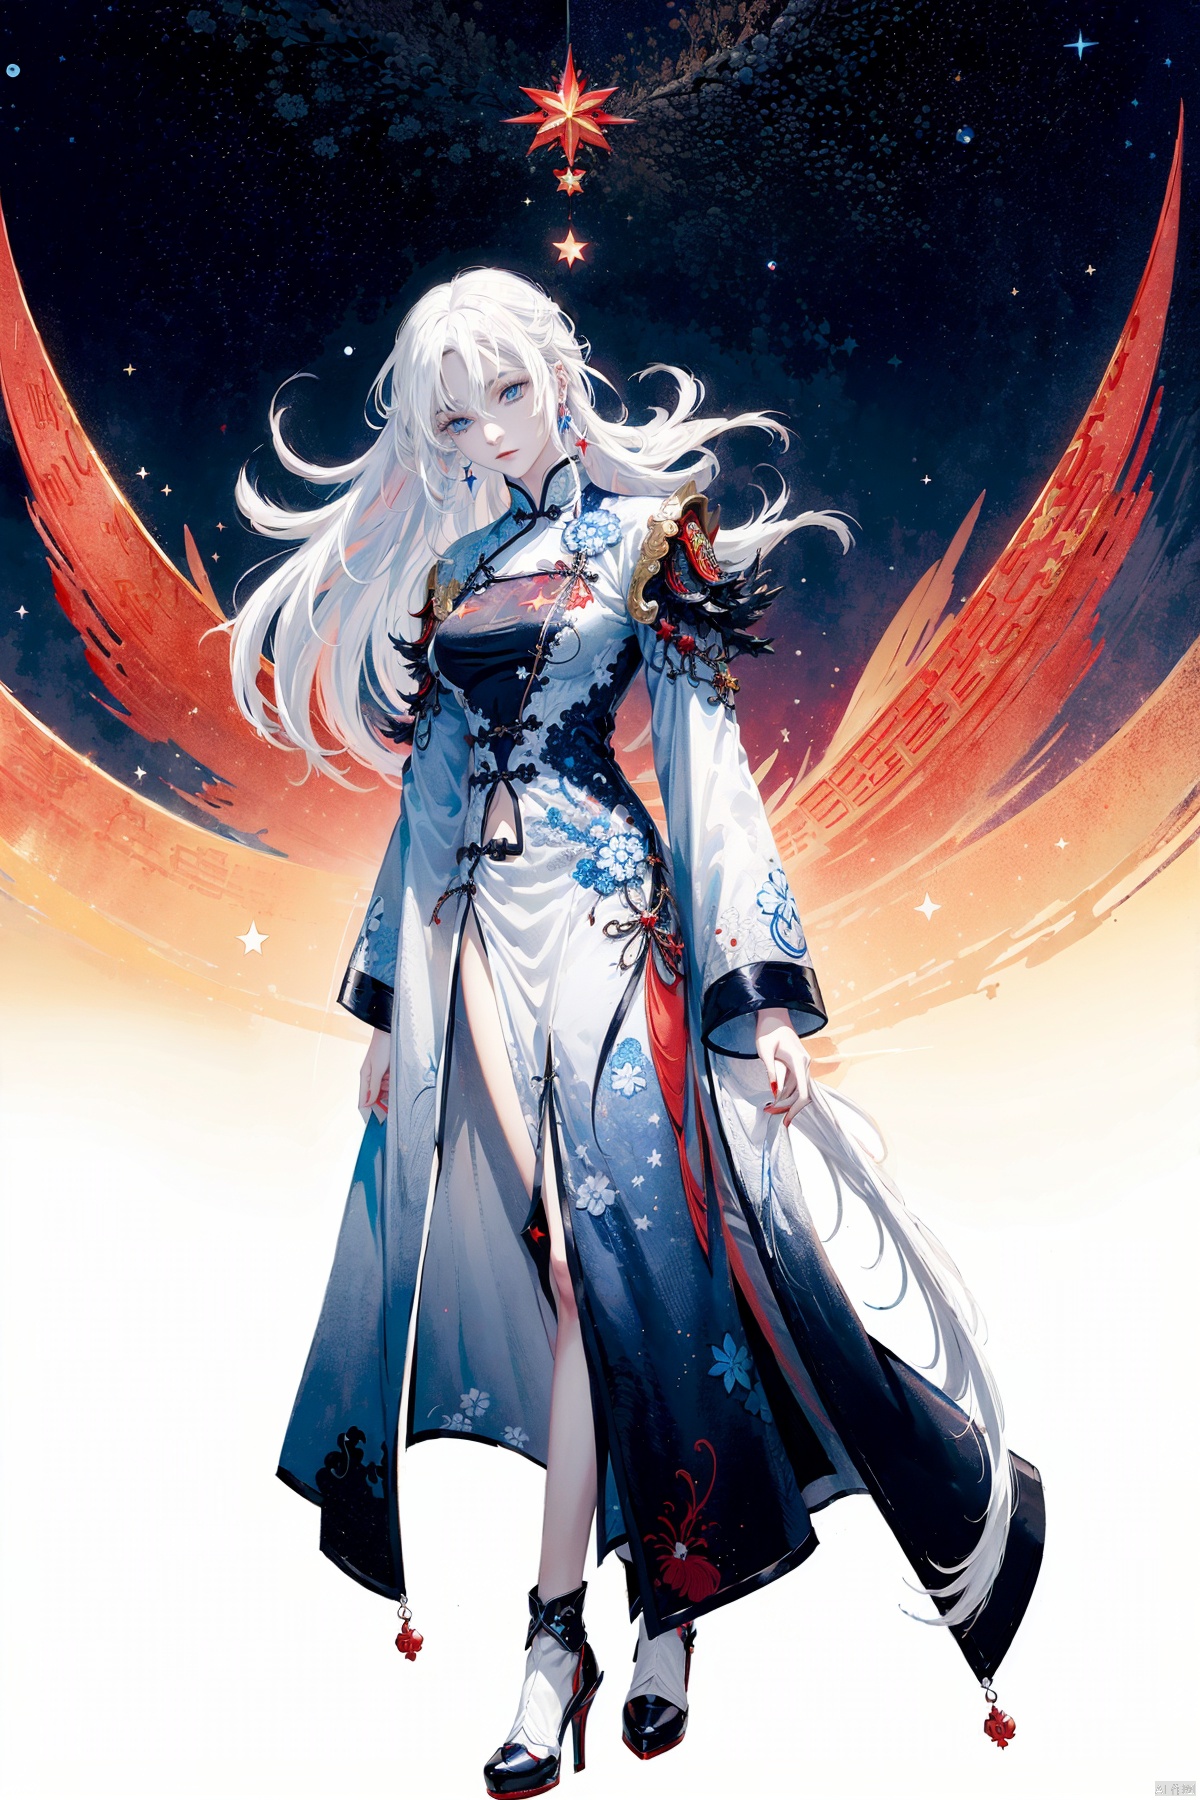  A demon with (white hair:1.5),(blue eyes:1.5) resembling blue gemstones, and a fringed haircut. This demon exudes an outgoing and sunny personality. She is dressed in a peculiar, mechanical construct cheongsam gown, predominantly made of gossamer material, with accents that evoke the ambiance of fire element. The cheongsam gown itself is in vibrant (Chinese red:1.5). Completing her ensemble, she wears a pair of high-heeled shoes.
, Against the backdrop of a night sky, there shines (a bright star:1.5), col